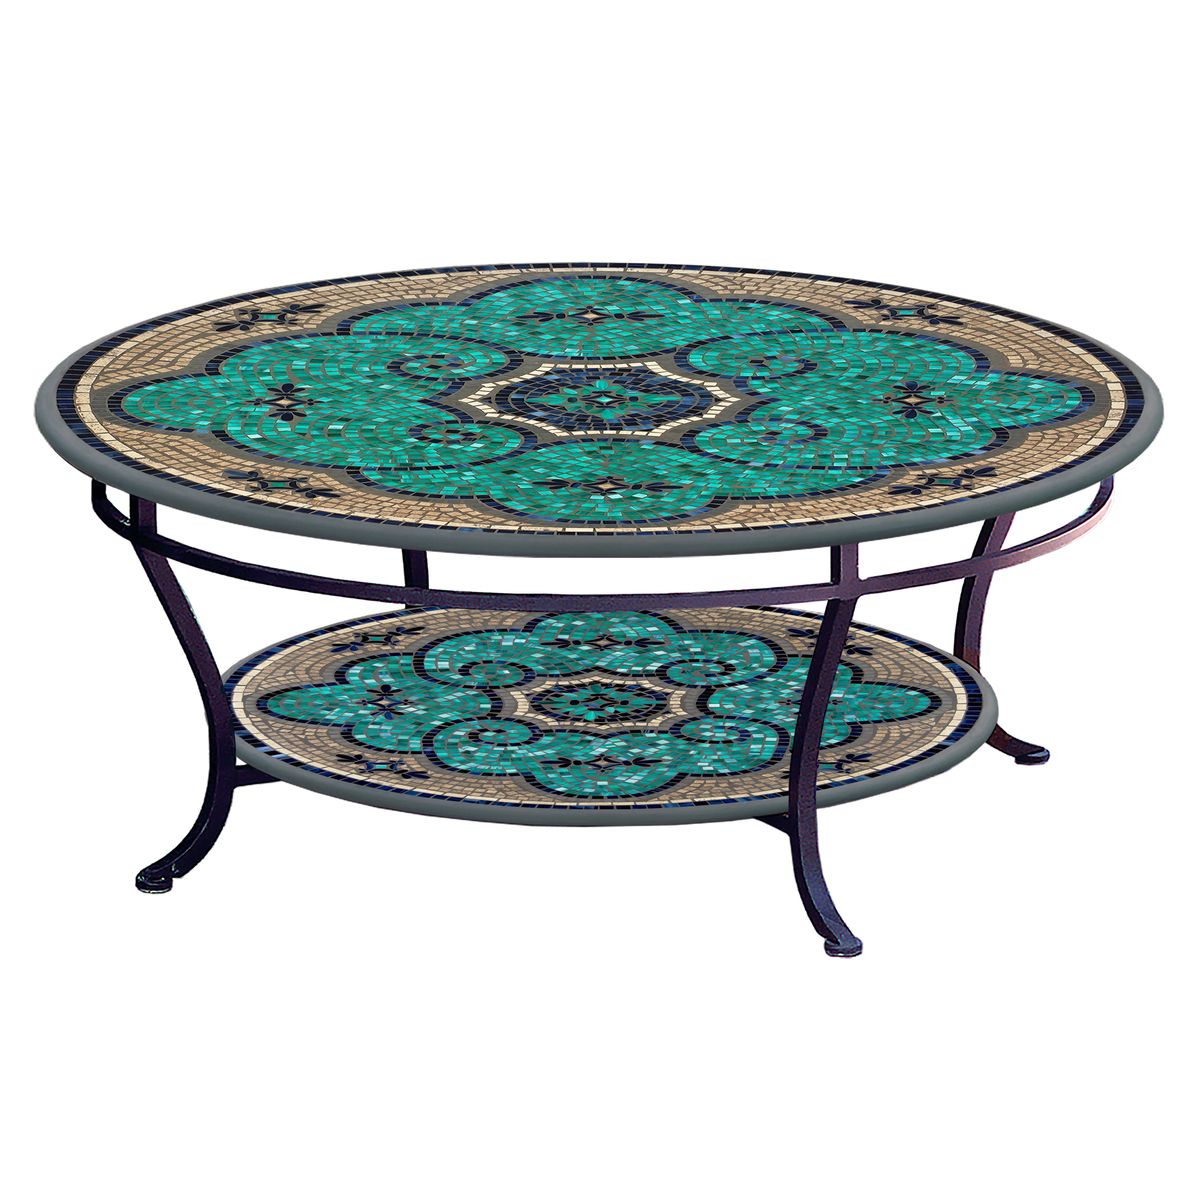 Sardinia Mosaic Coffee Table - Tiered-Iron Accents